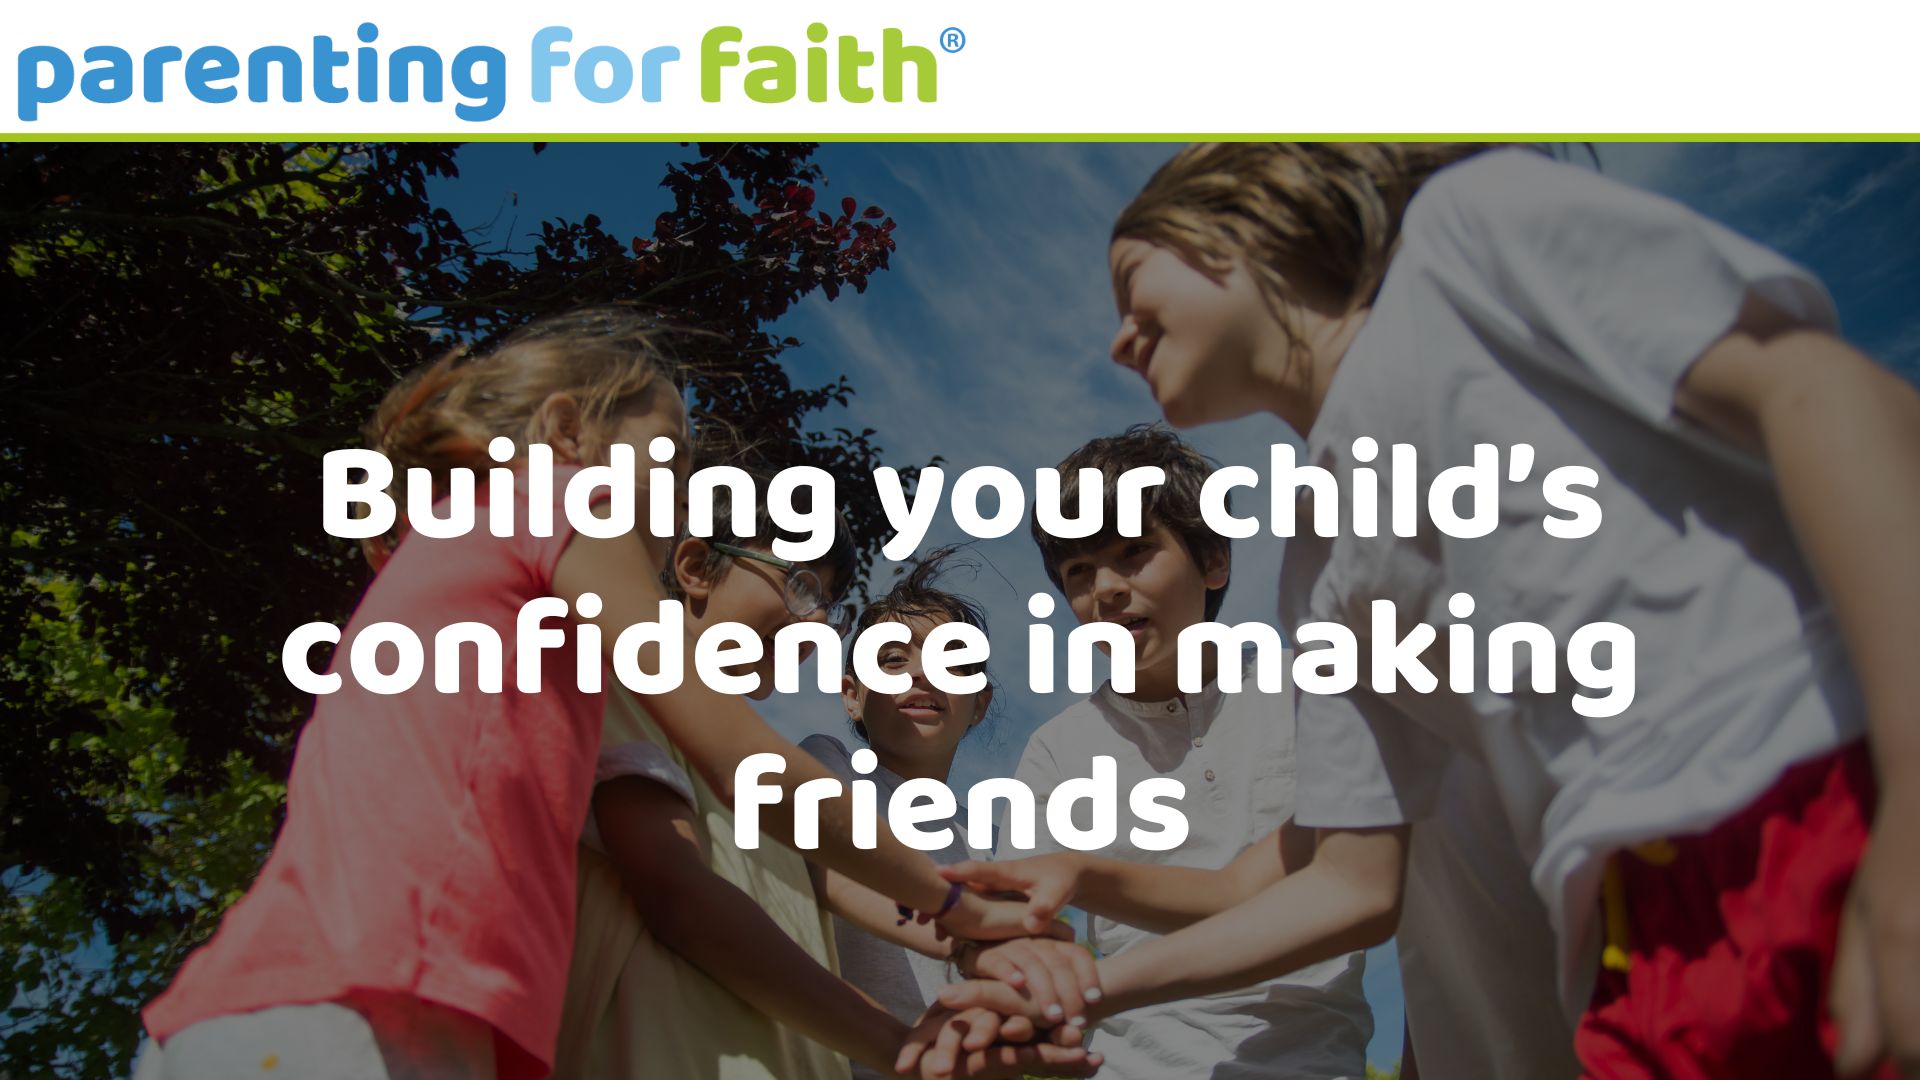 Building your child’s confidence in making friends image credit Kamus Production from Pexels